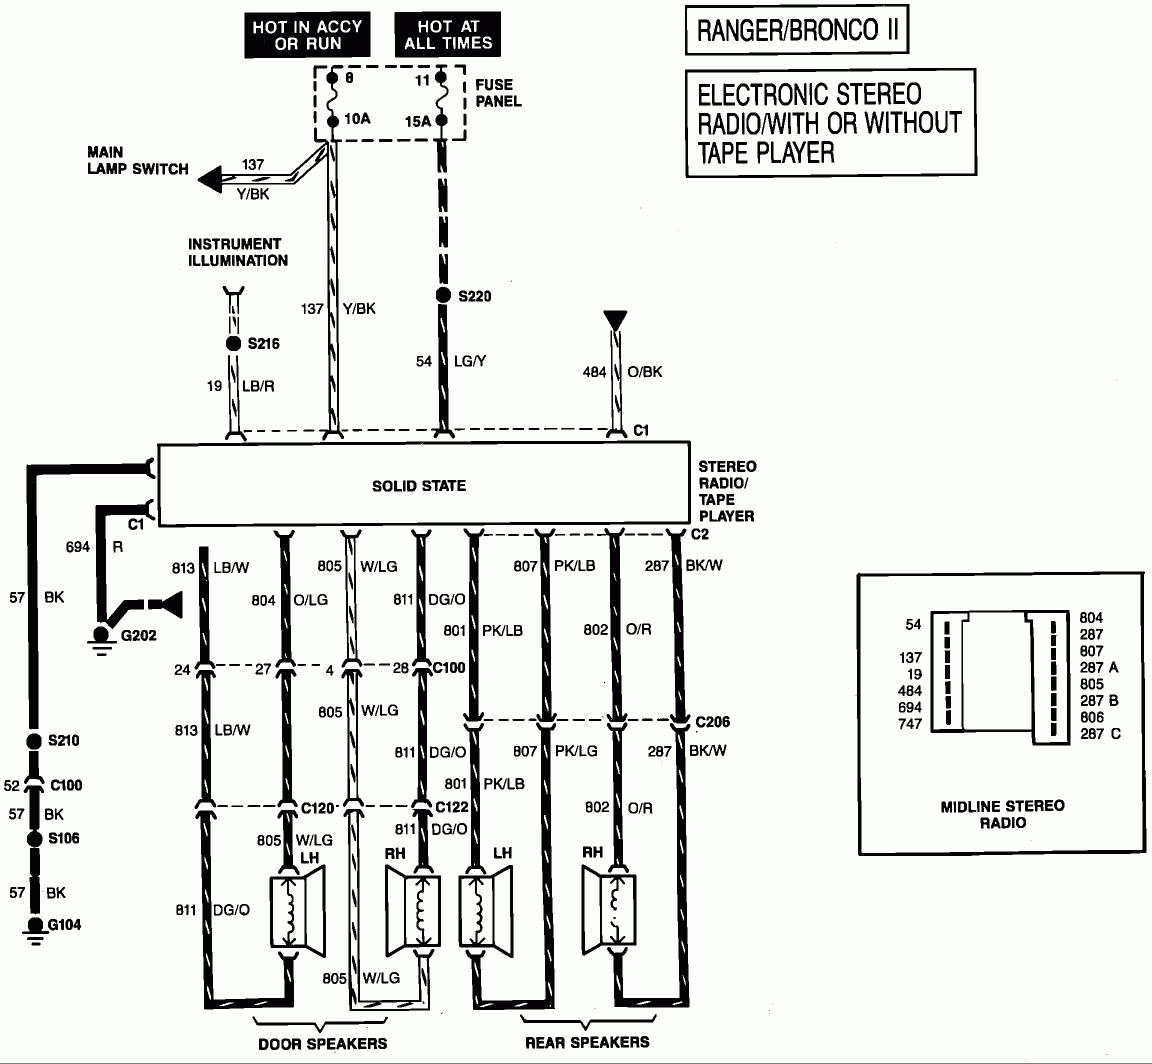 I Need The Wiring Diagram For Factory Stereo In A 1989 Ford Ranger XLT